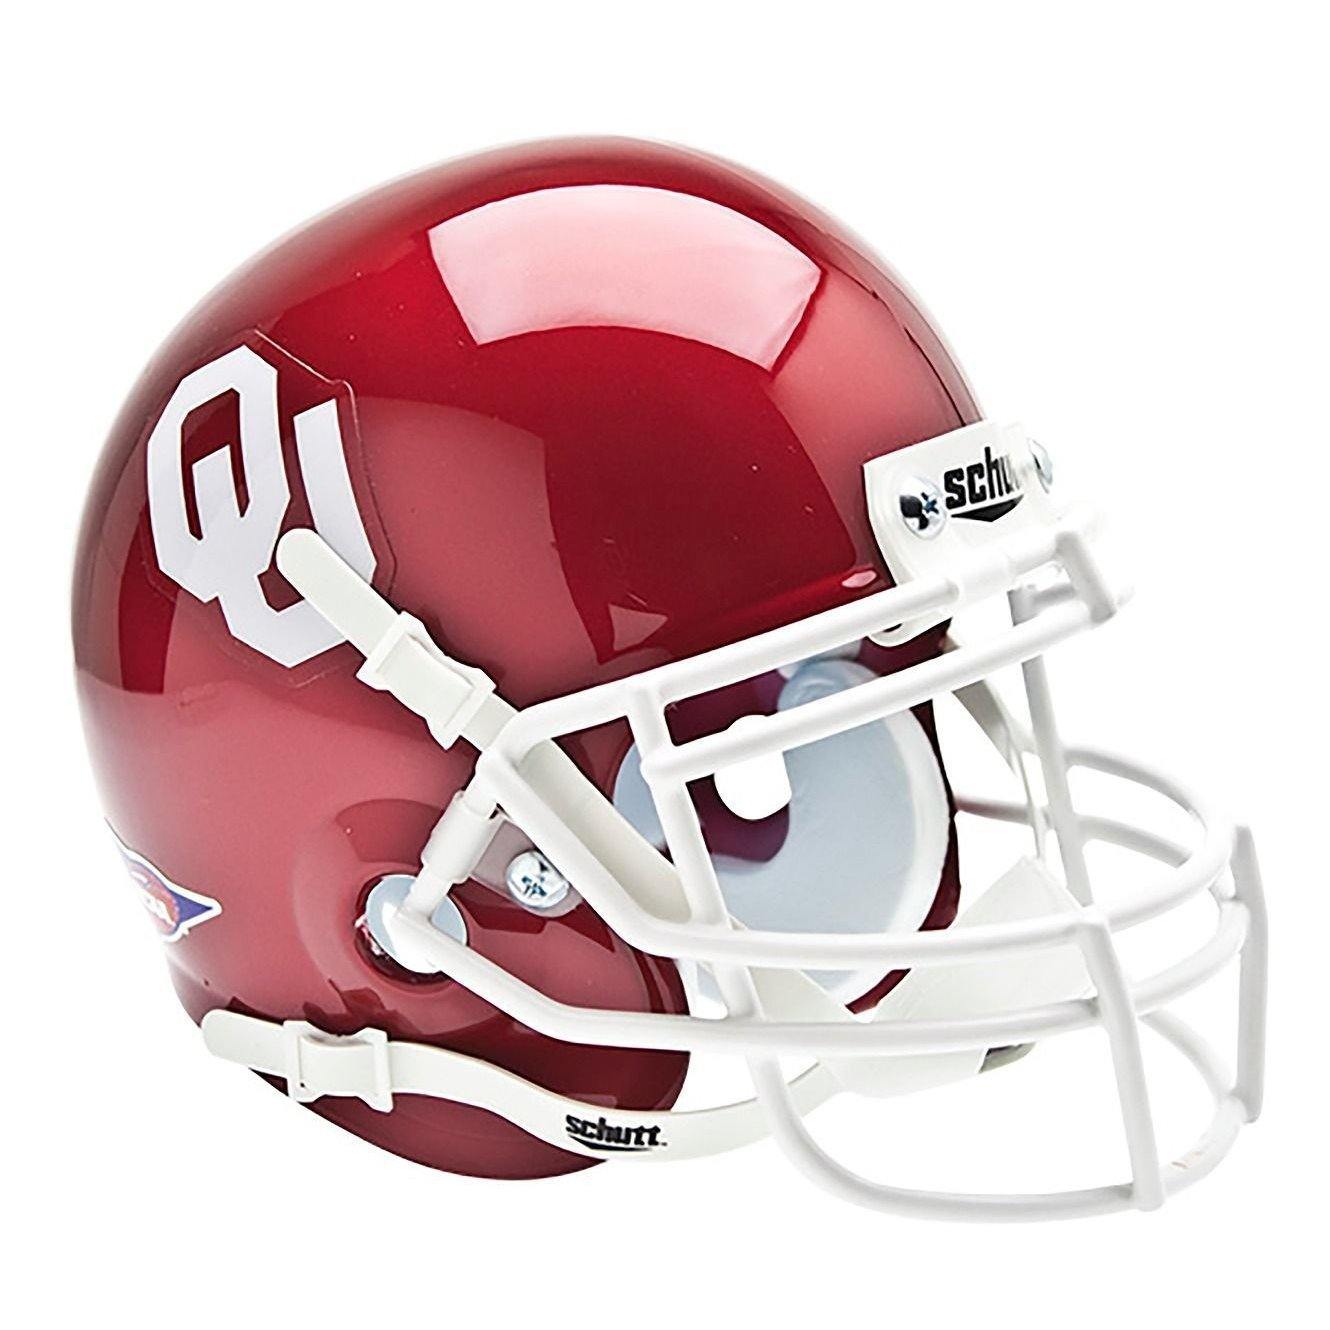 Oklahoma Sooners College Football Collectible Schutt Mini Helmet - Picture Inside - FANZ Collectibles - Fanz Collectibles